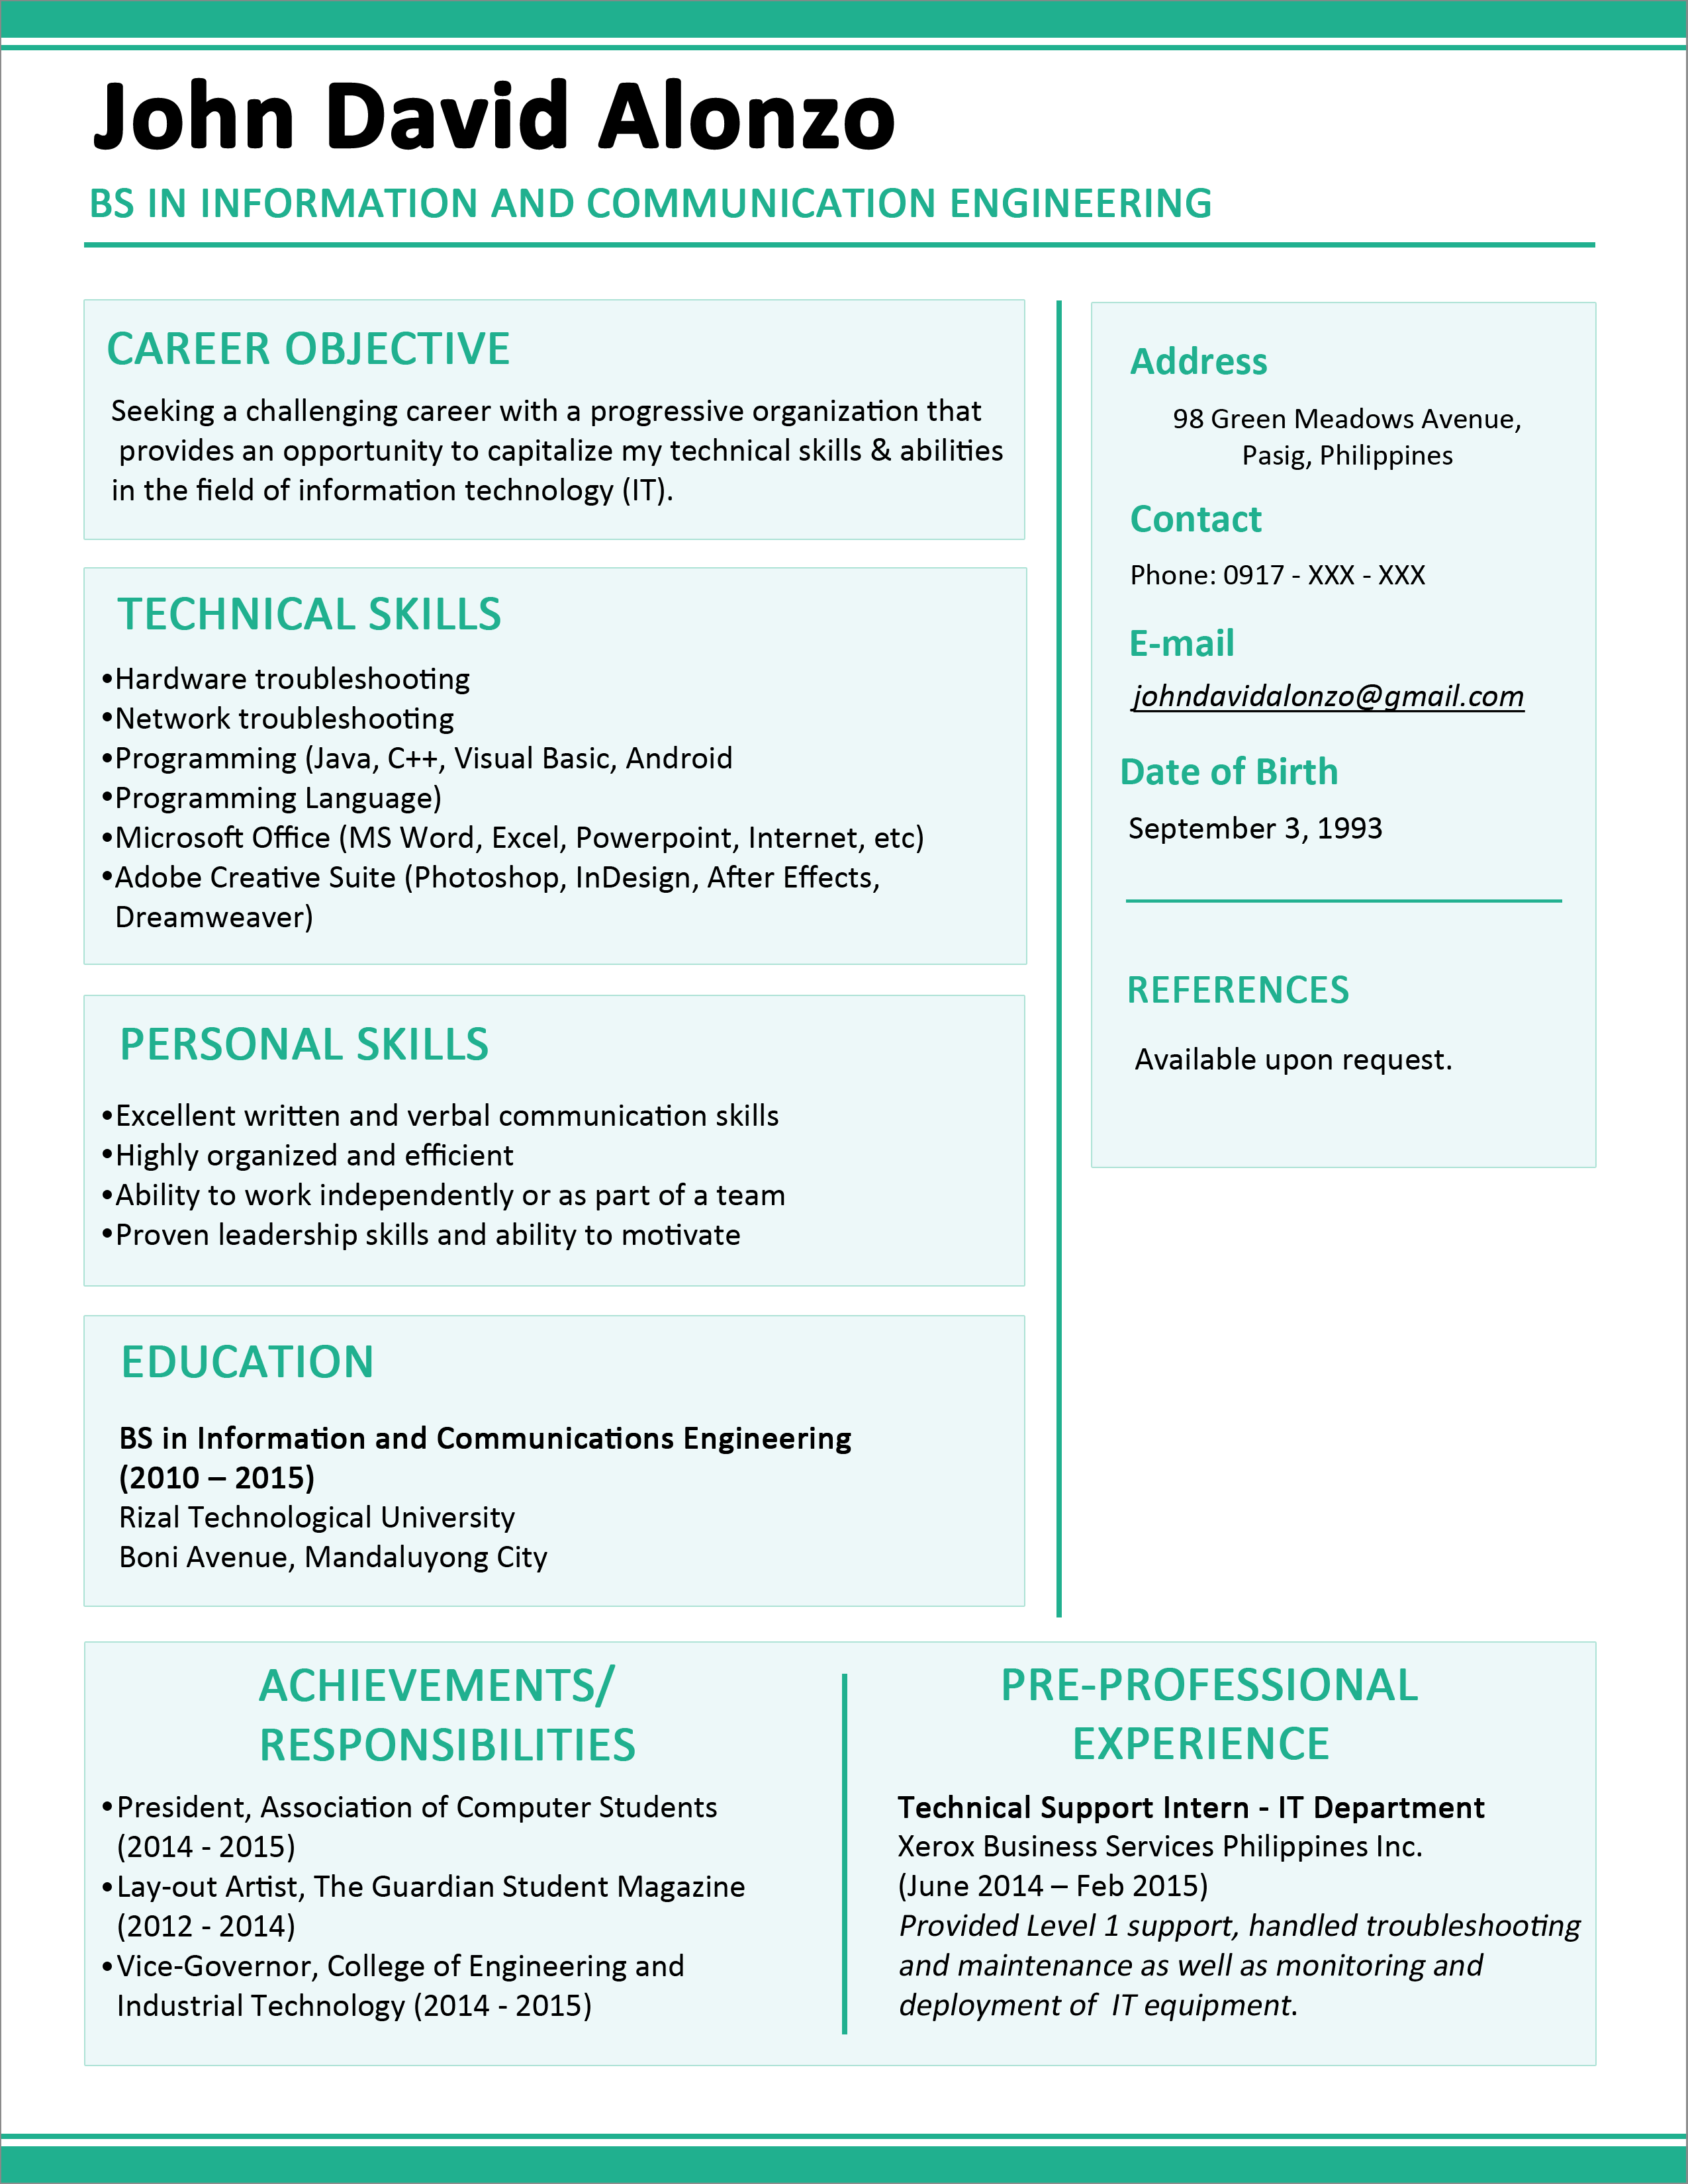 Resume Format One Page 